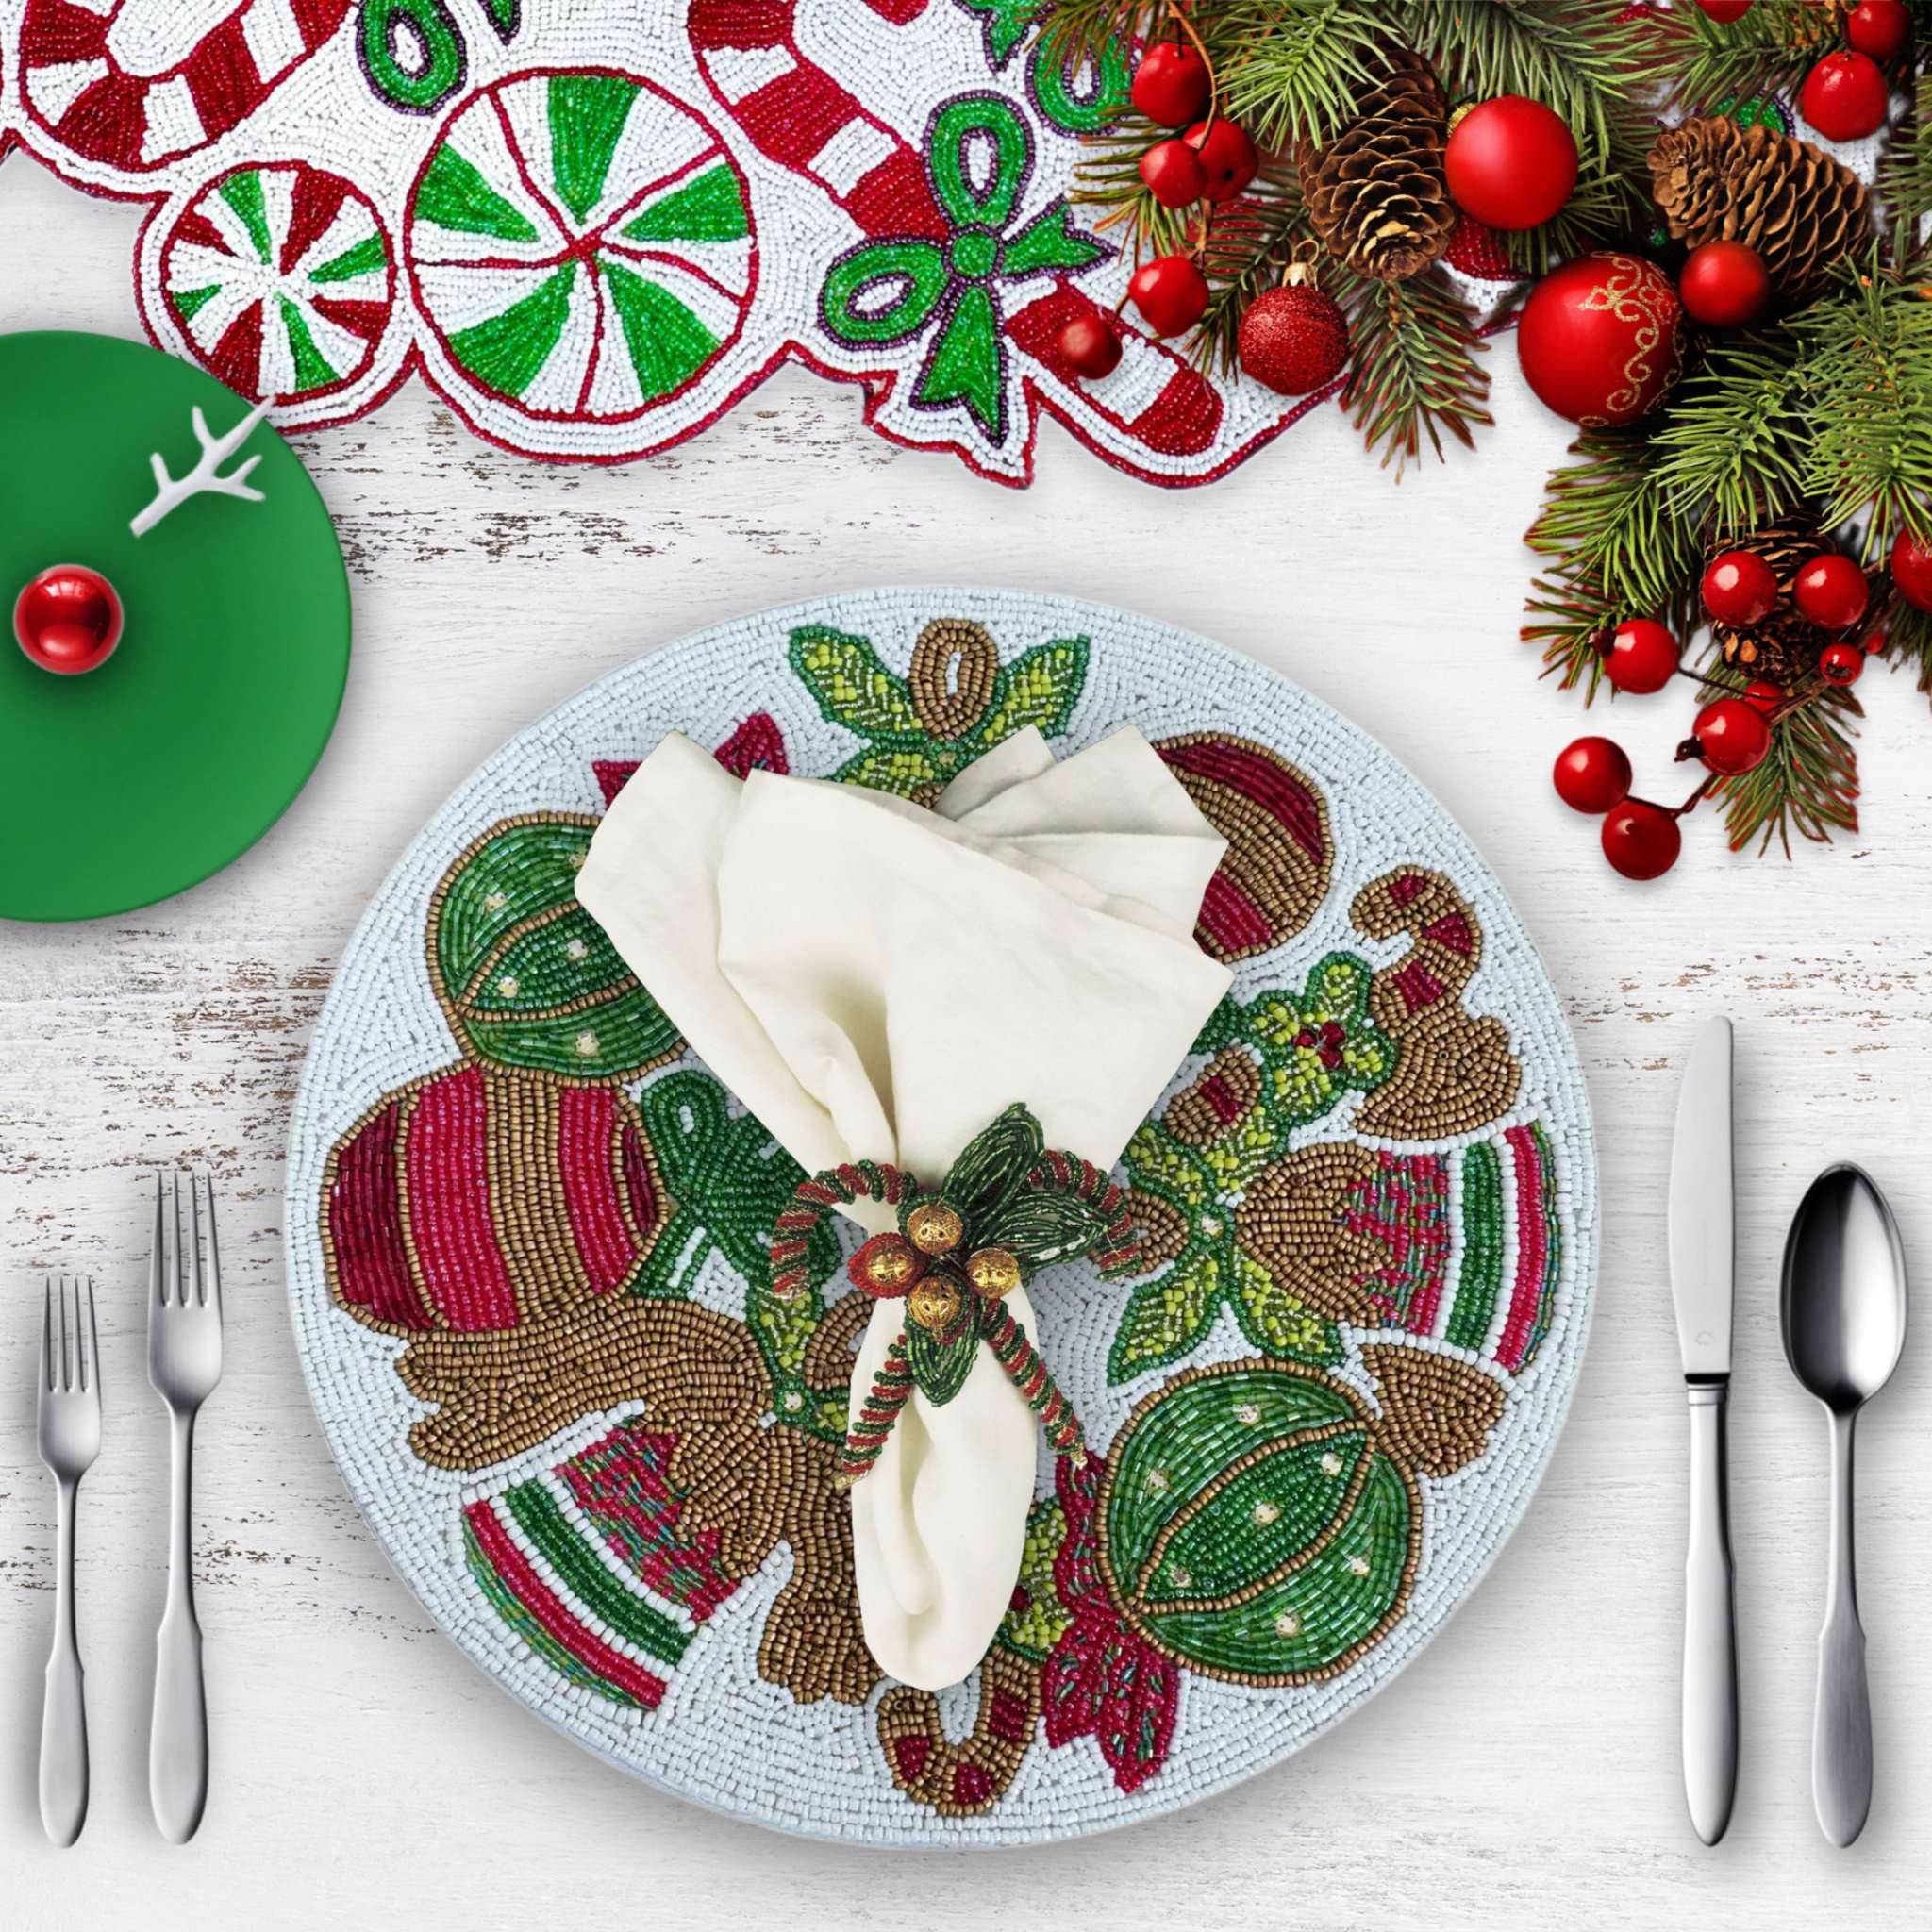 Jingle Balls Bead Embroidered Placemat in White, Red & Green, Set of 2/4